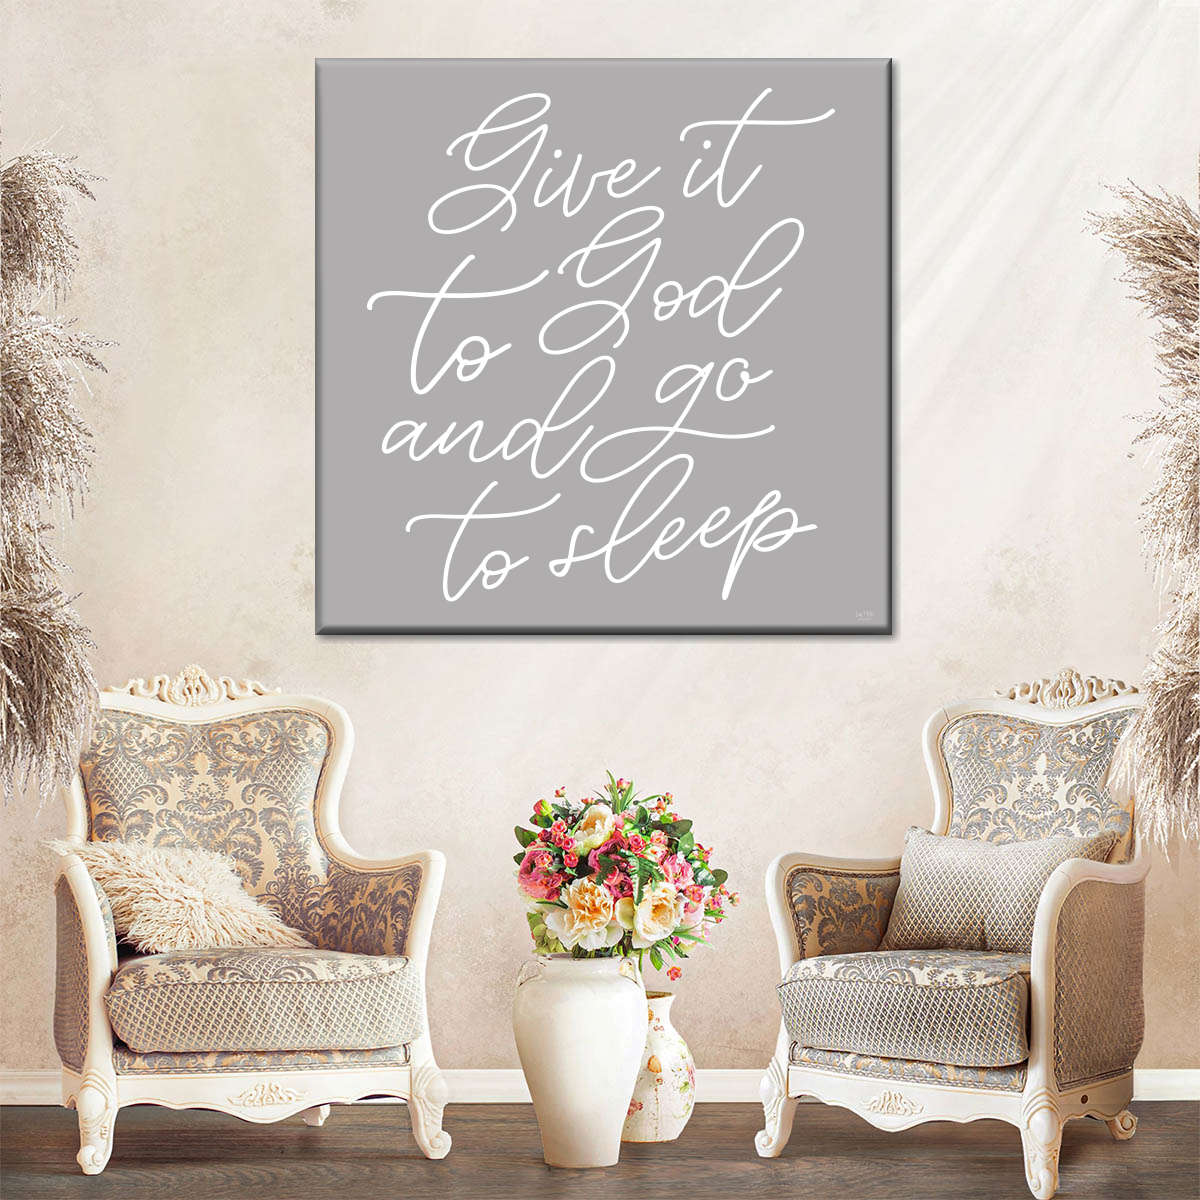 Give It to God Square Canvas Wall Art - Christian Wall Decor - Christian Wall Hanging